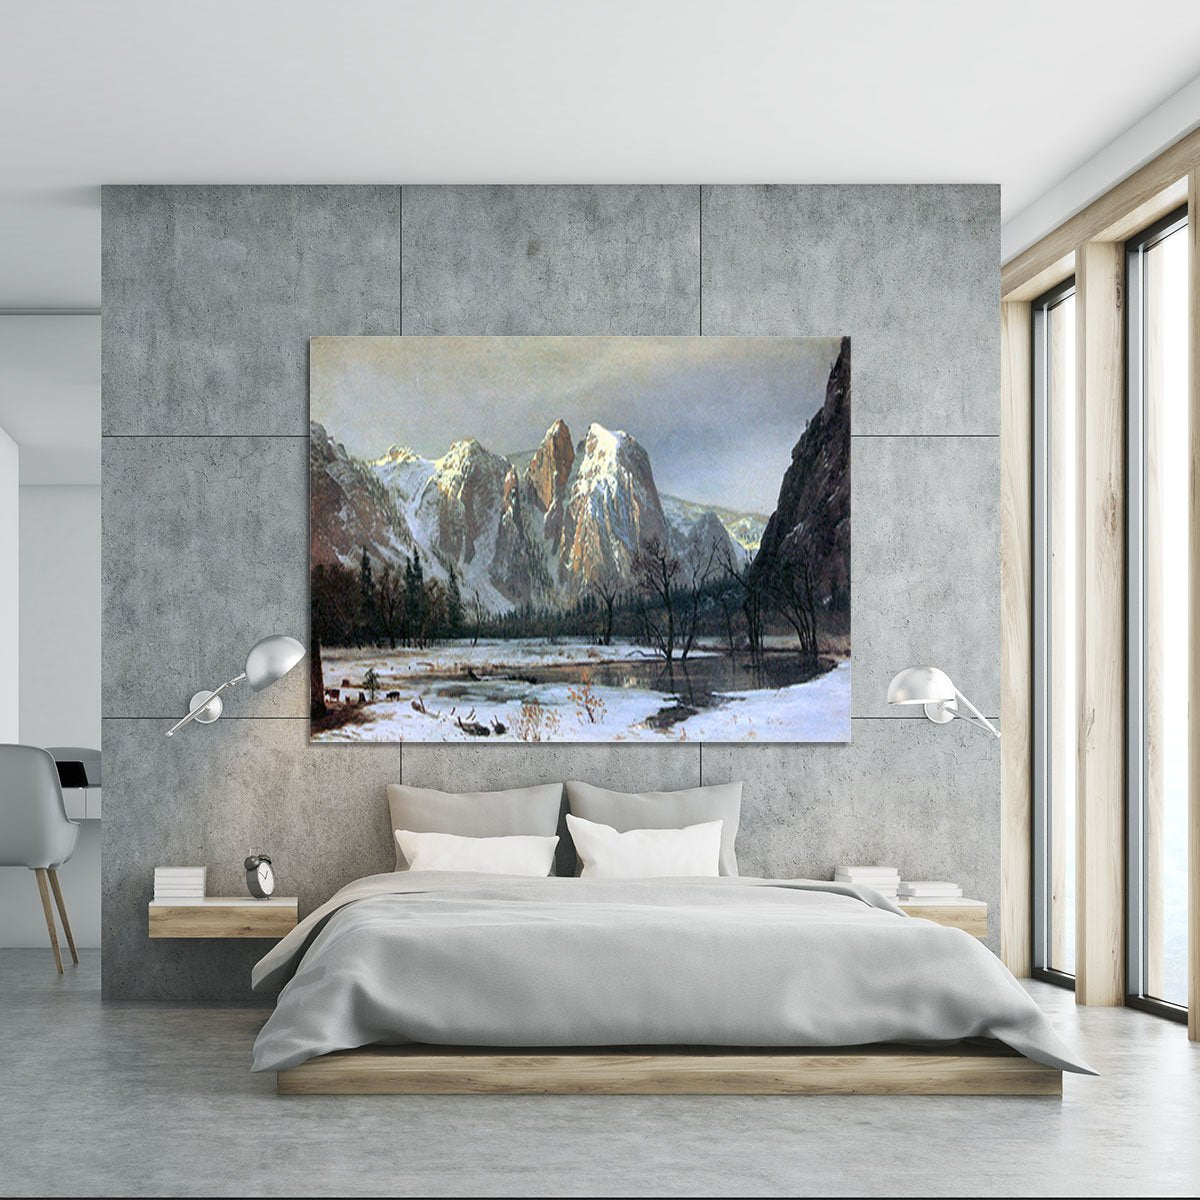 Cathedral Rocks Yosemite by Bierstadt Canvas Print or Poster